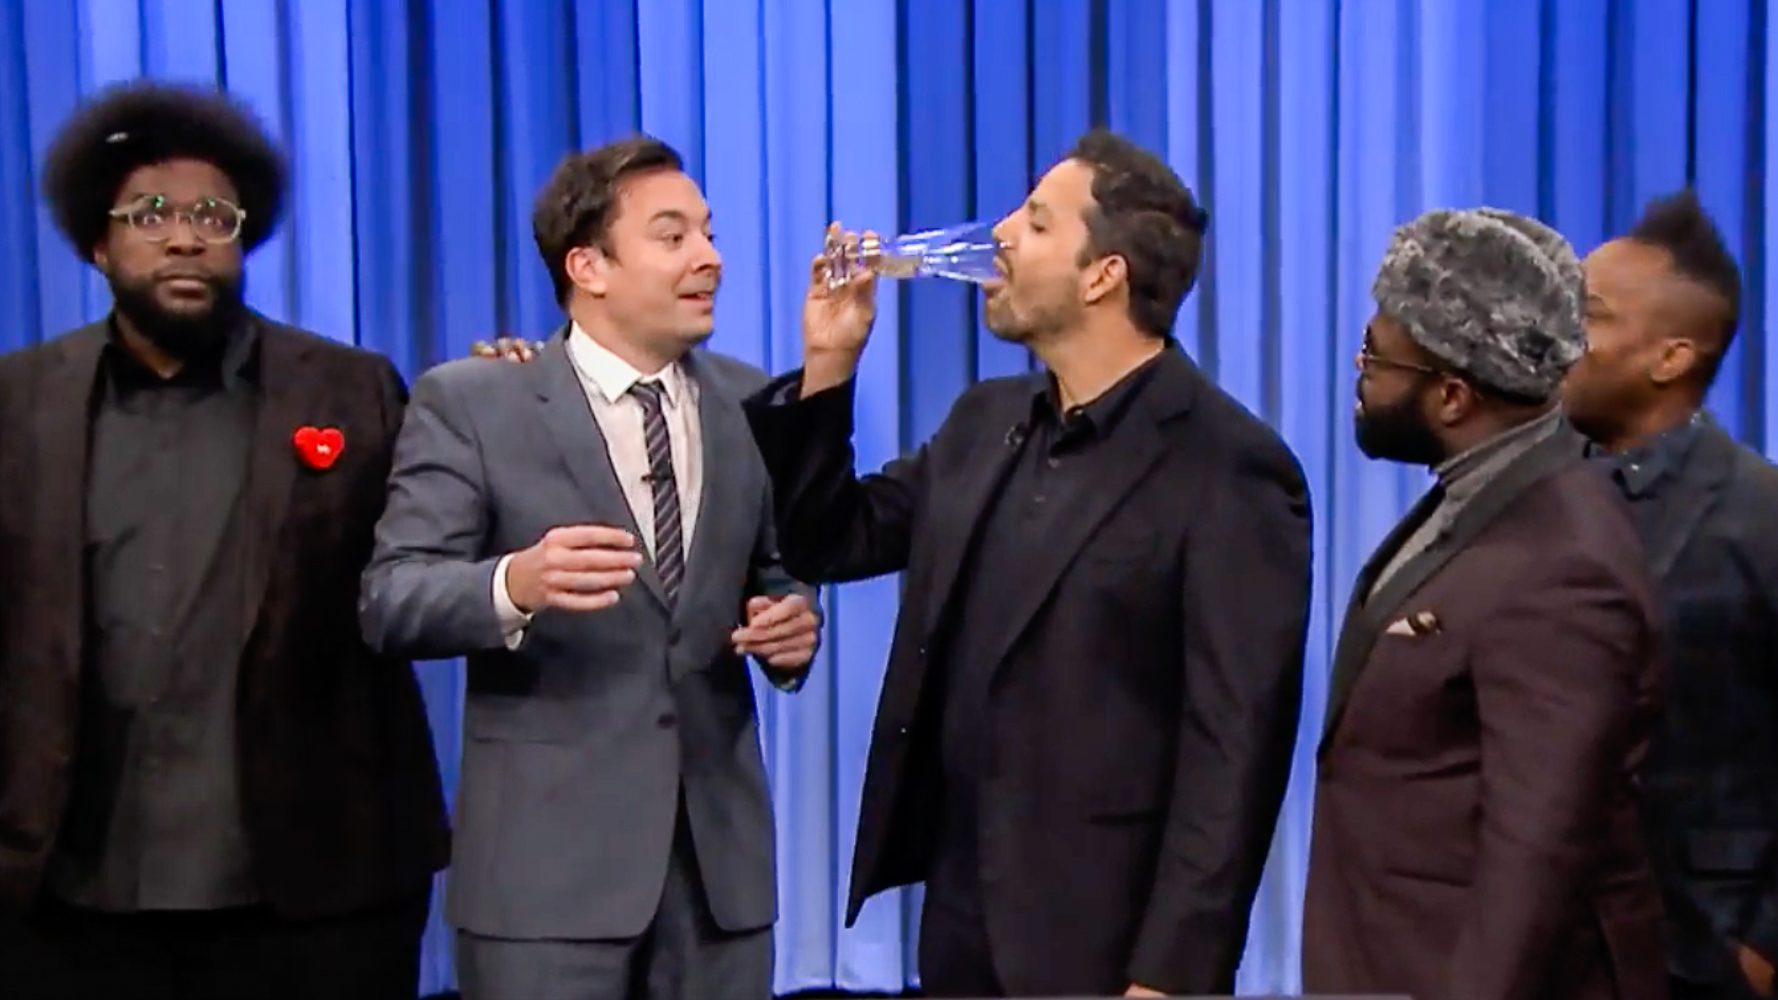 Screengrab from YouTube/Tonight Show Starring Jimmy Fallon 